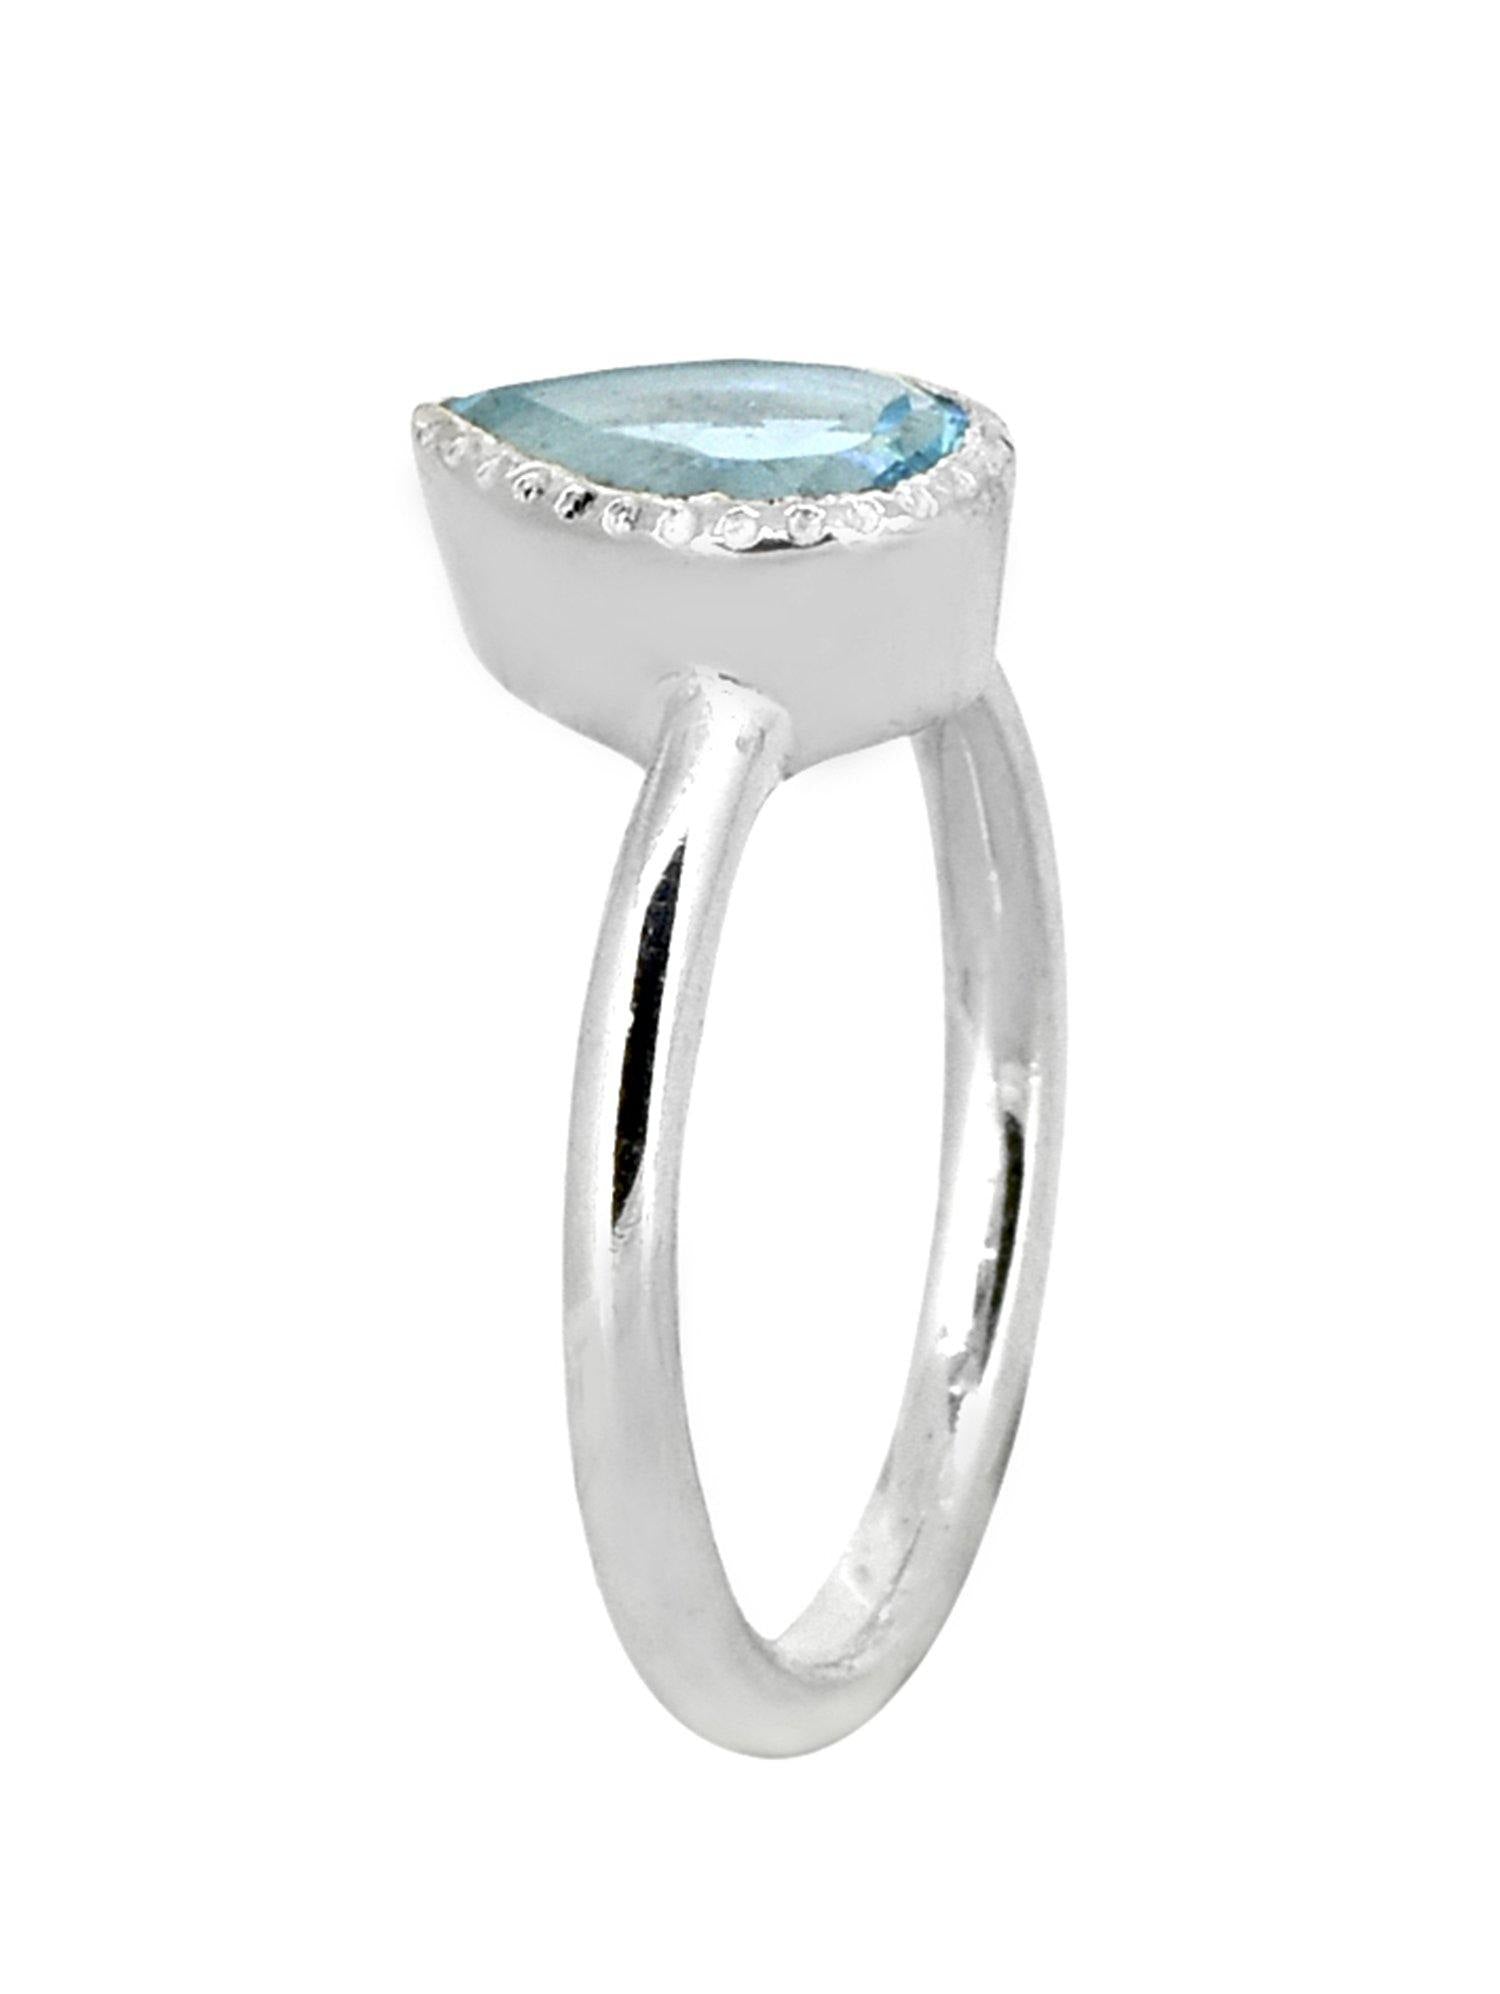 Sky Blue Topaz Solid 925 Sterling Silver Gemstone Solitaire Ring Jewelry - YoTreasure